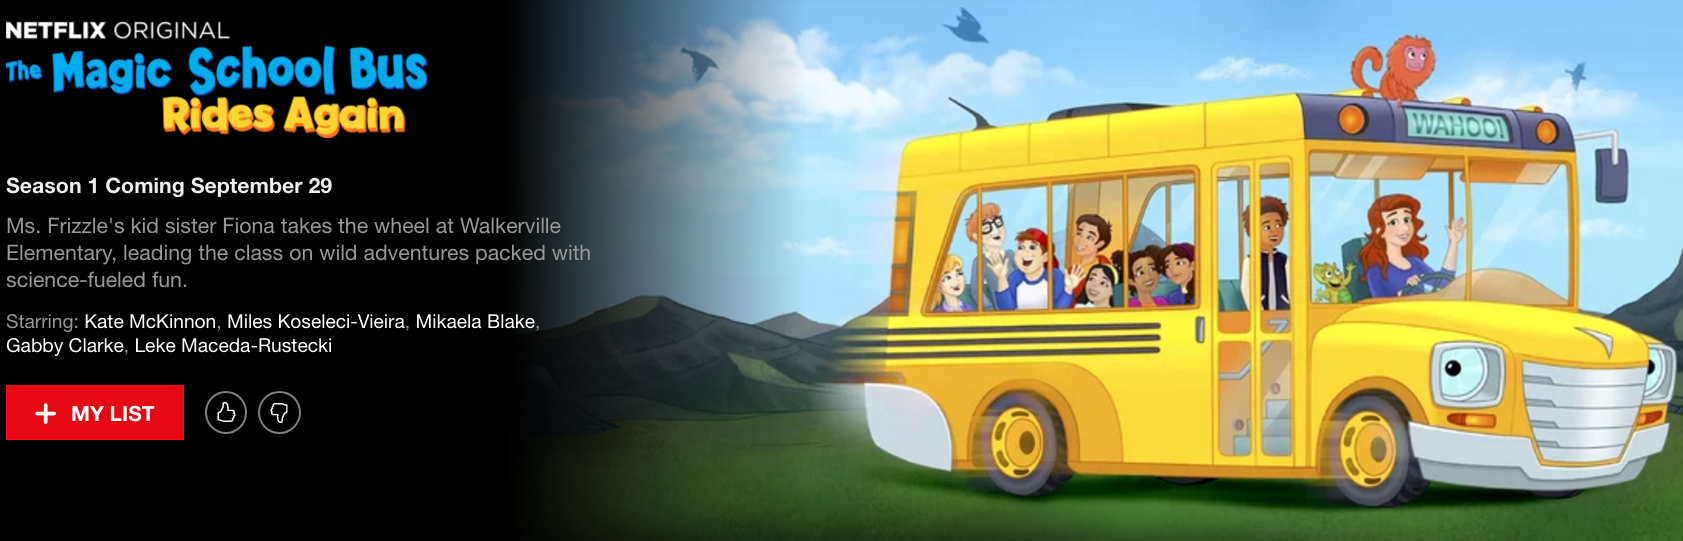 Trailer The Magic School Bus Rides Again Coming To Netflix September 29 2017